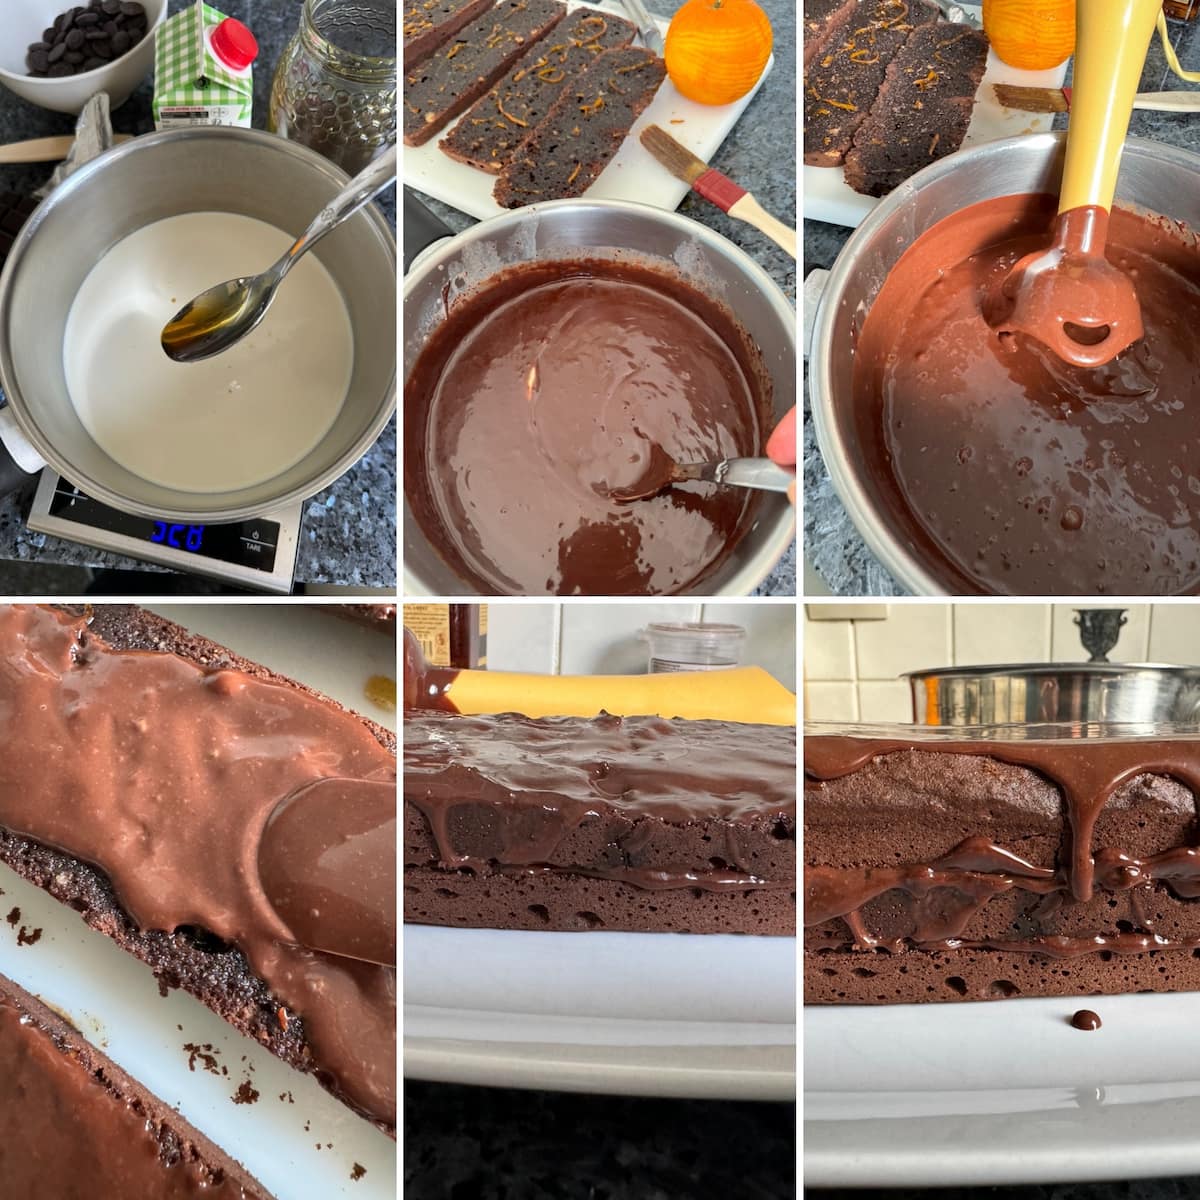 6 steps of heating cream with honey, melting in chocolate and butter then spread over the cake layers